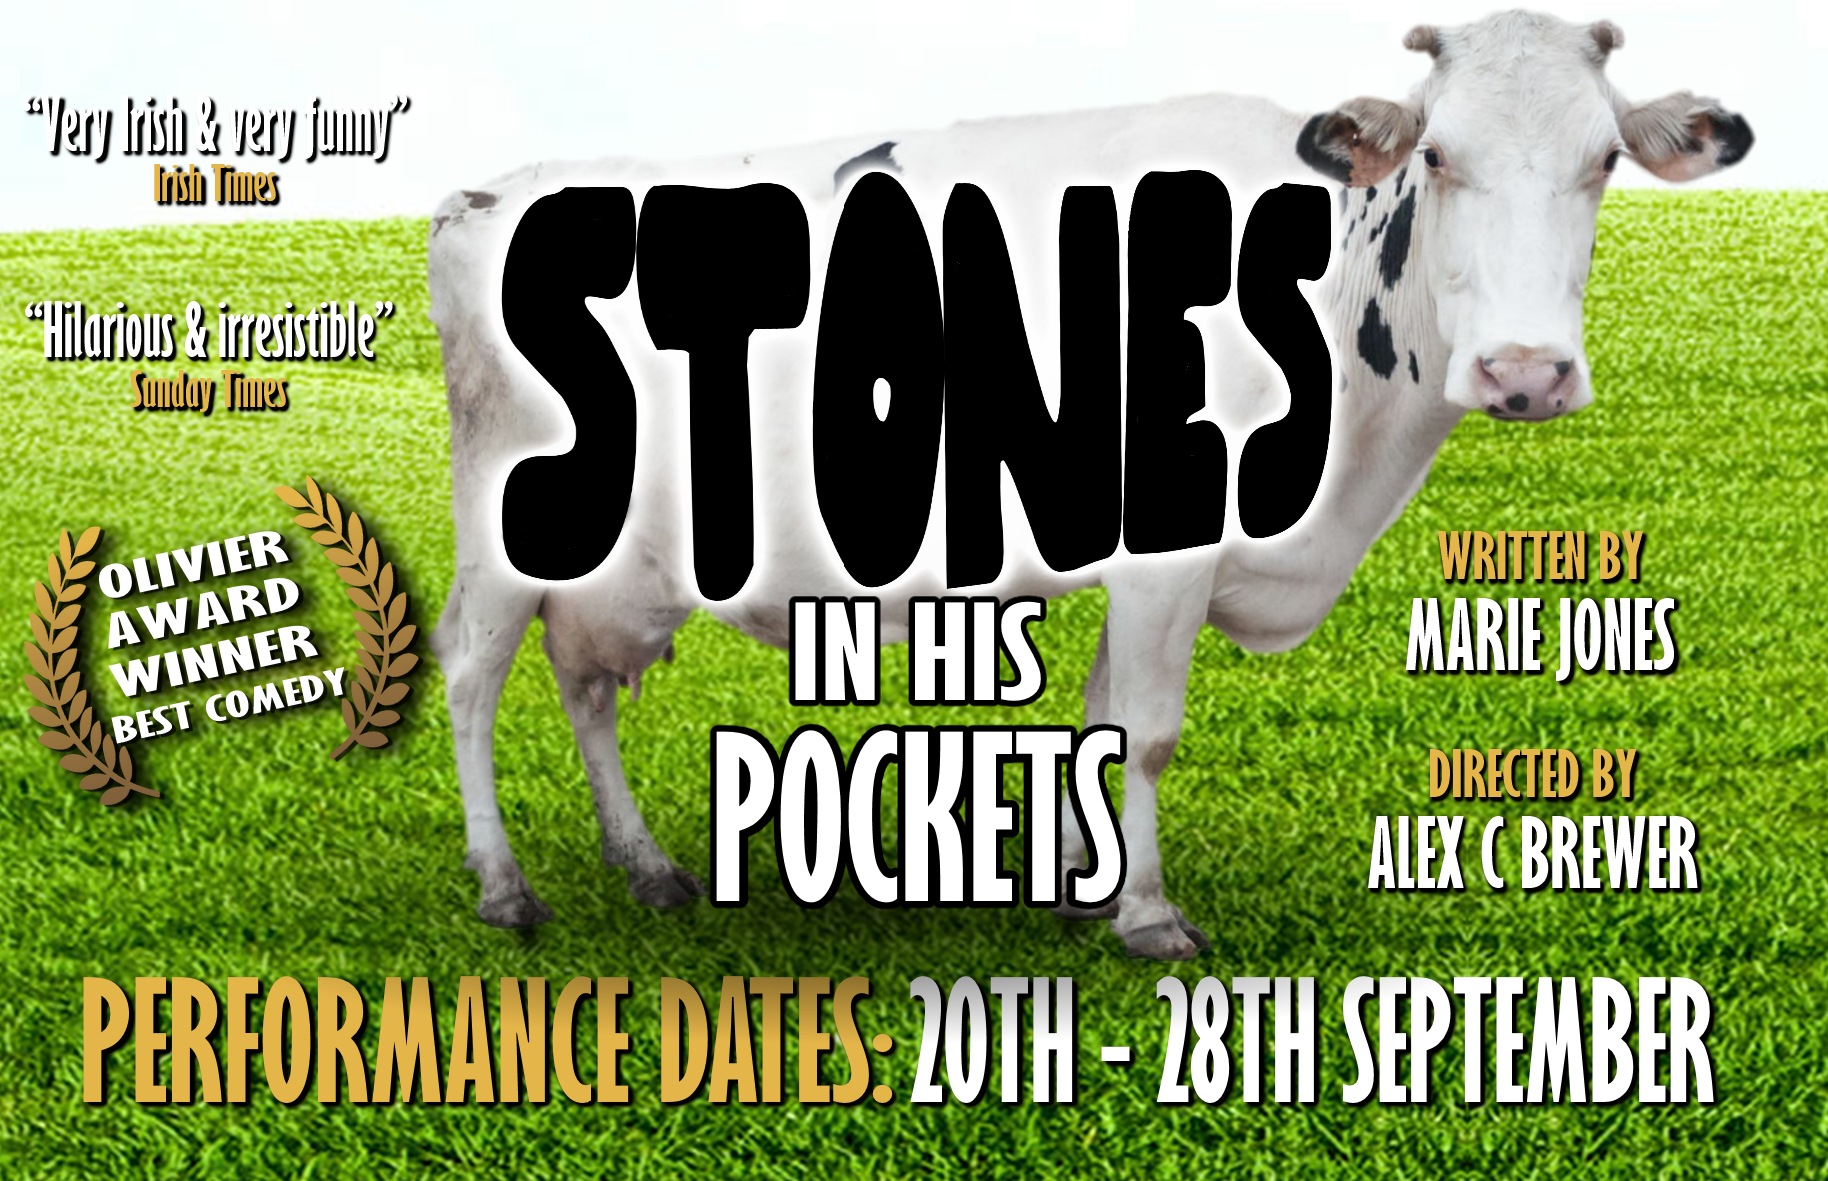 Stones in his Pockets Web Poster